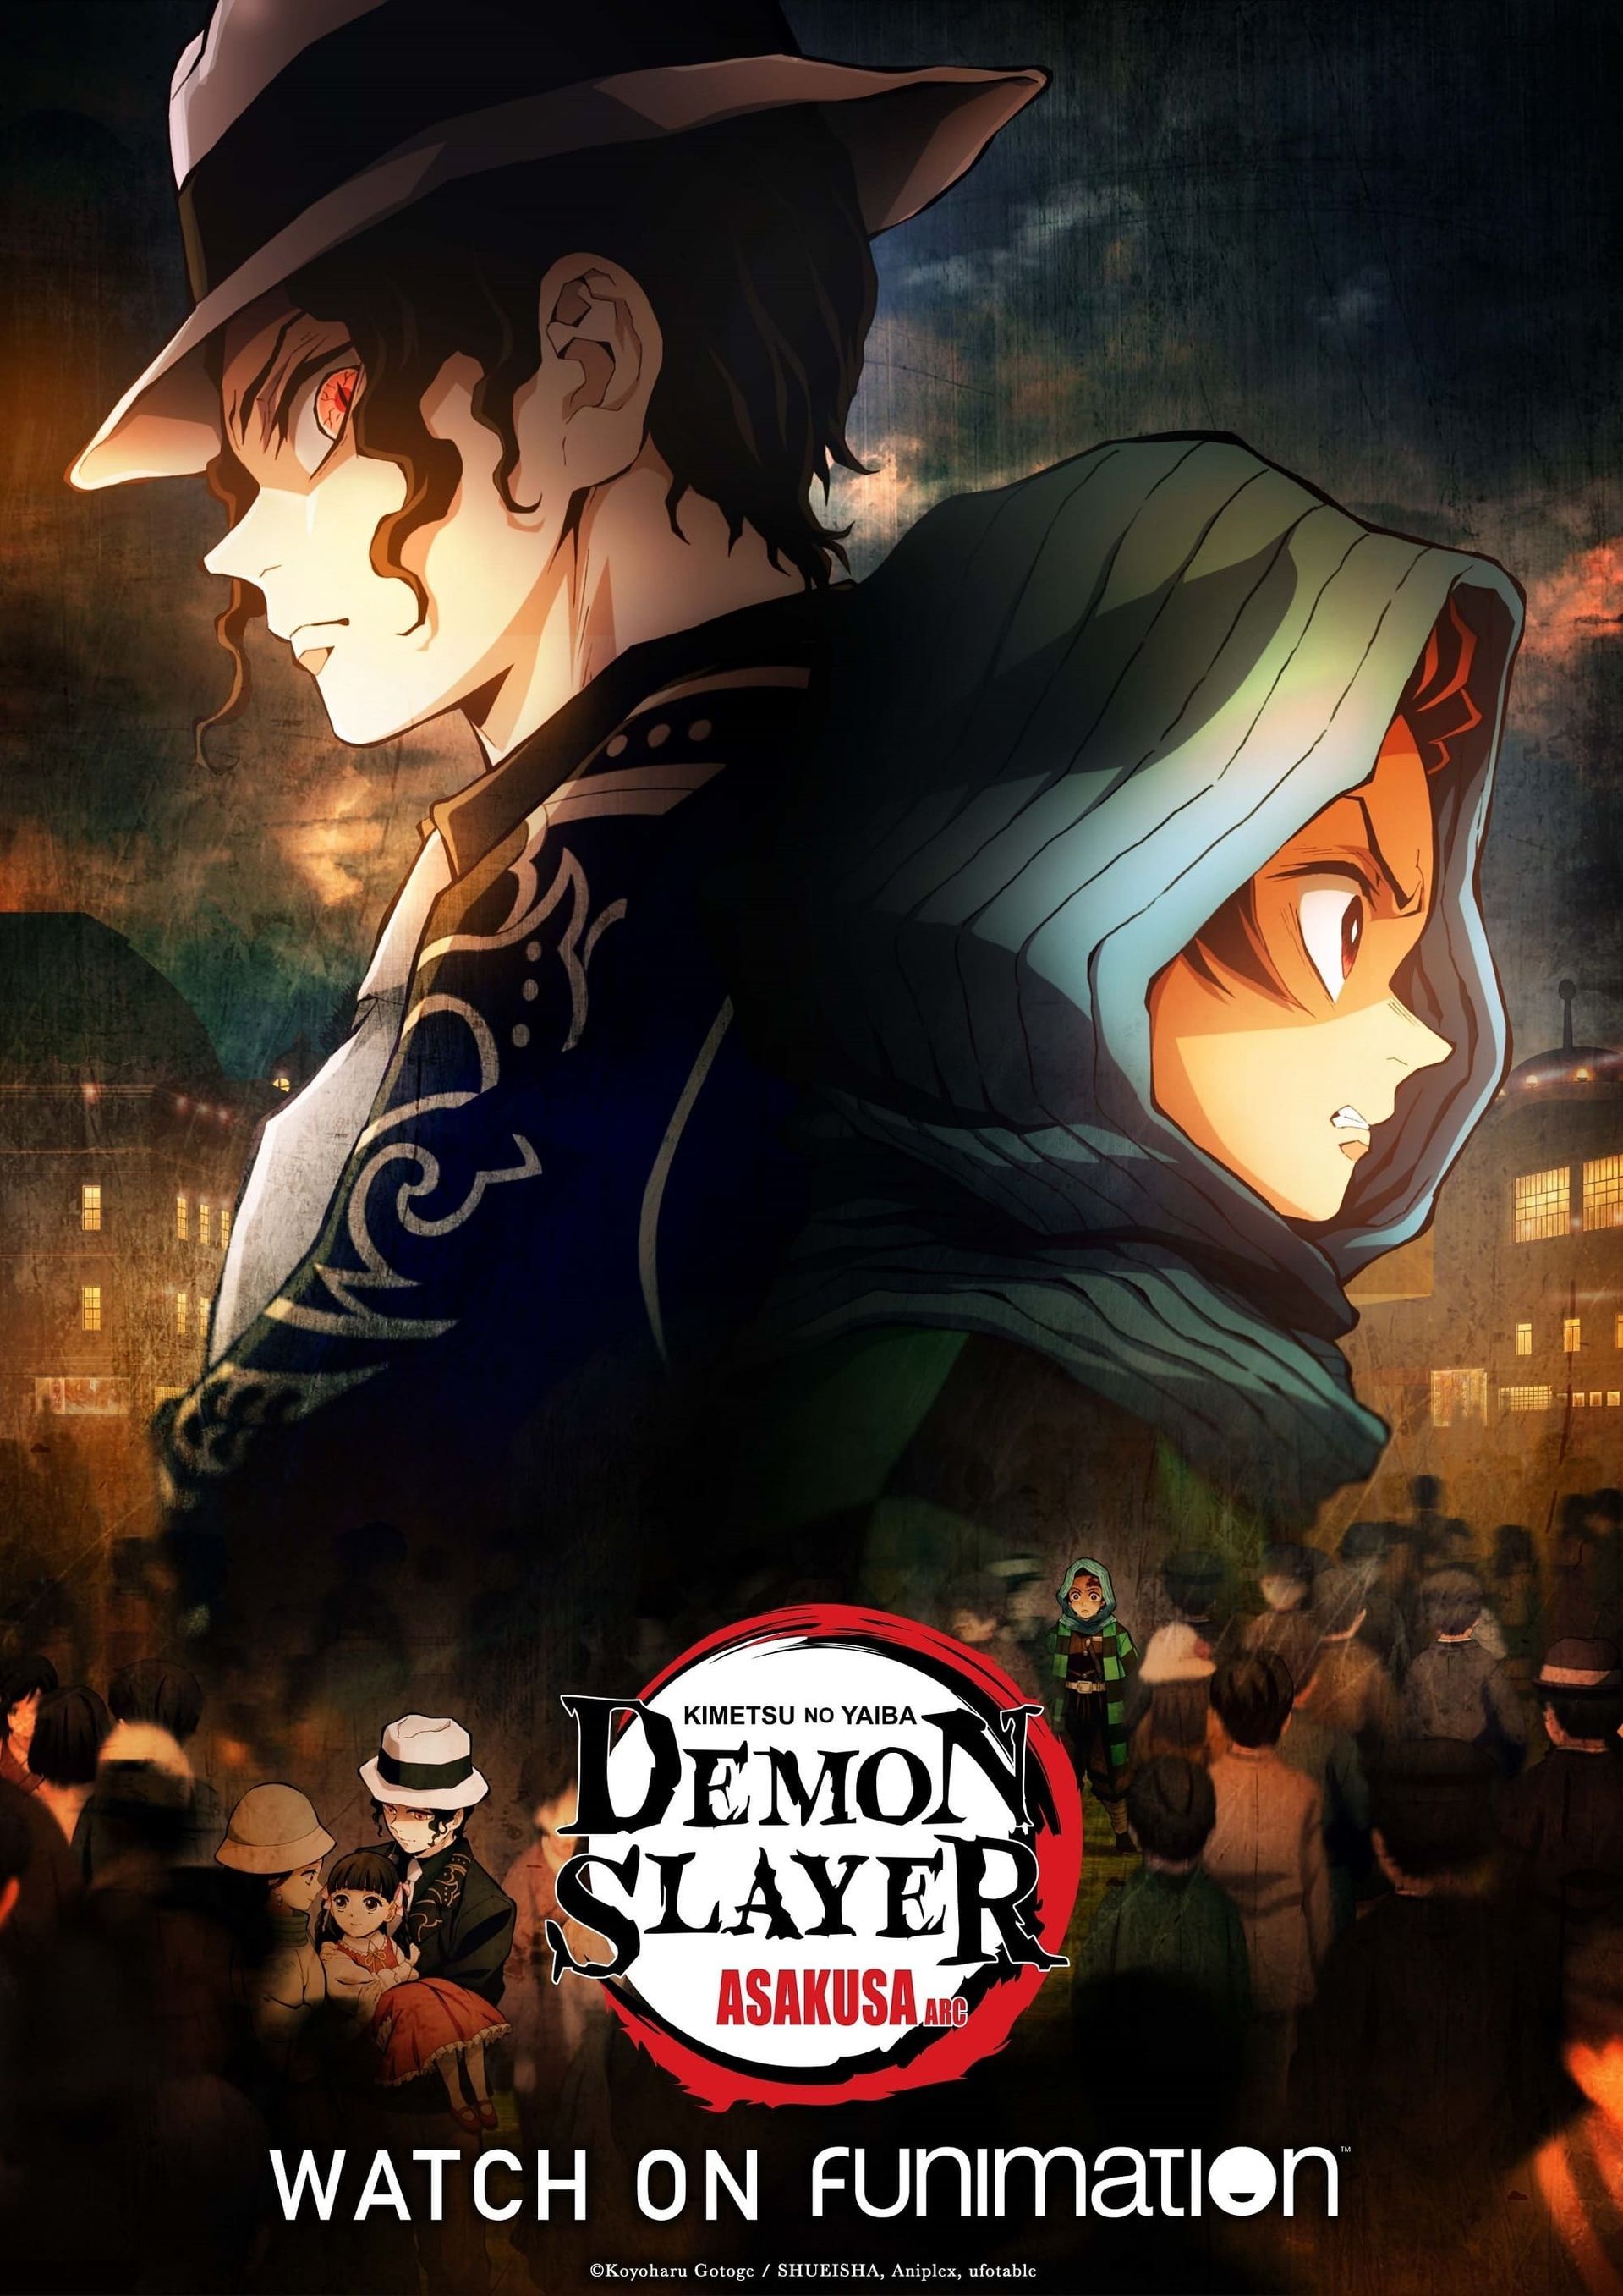 RockyDrago66 on X: @ERCboxoffice Suzume is opening in more theaters than  fellow 2023 Crunchyroll movie Demon Slayer: Kimetsu No Yaiba - To the  Swordsmith Village (1,774 theaters / $10,117,806 opening weekend). #Suzume #